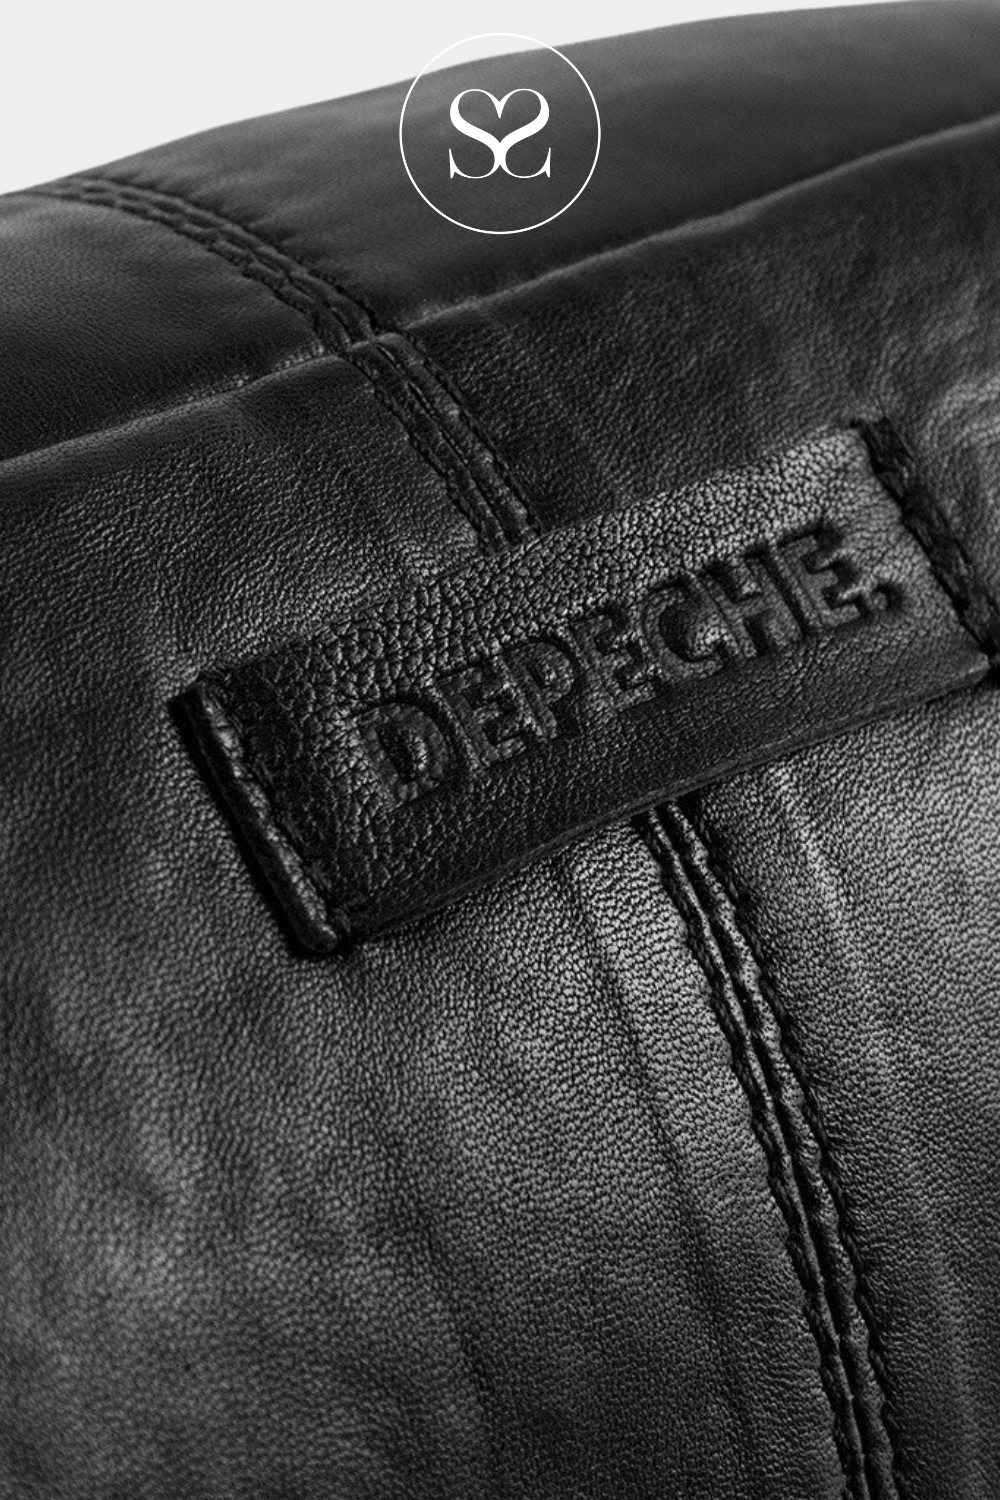 Black leather bum bag from Depeche